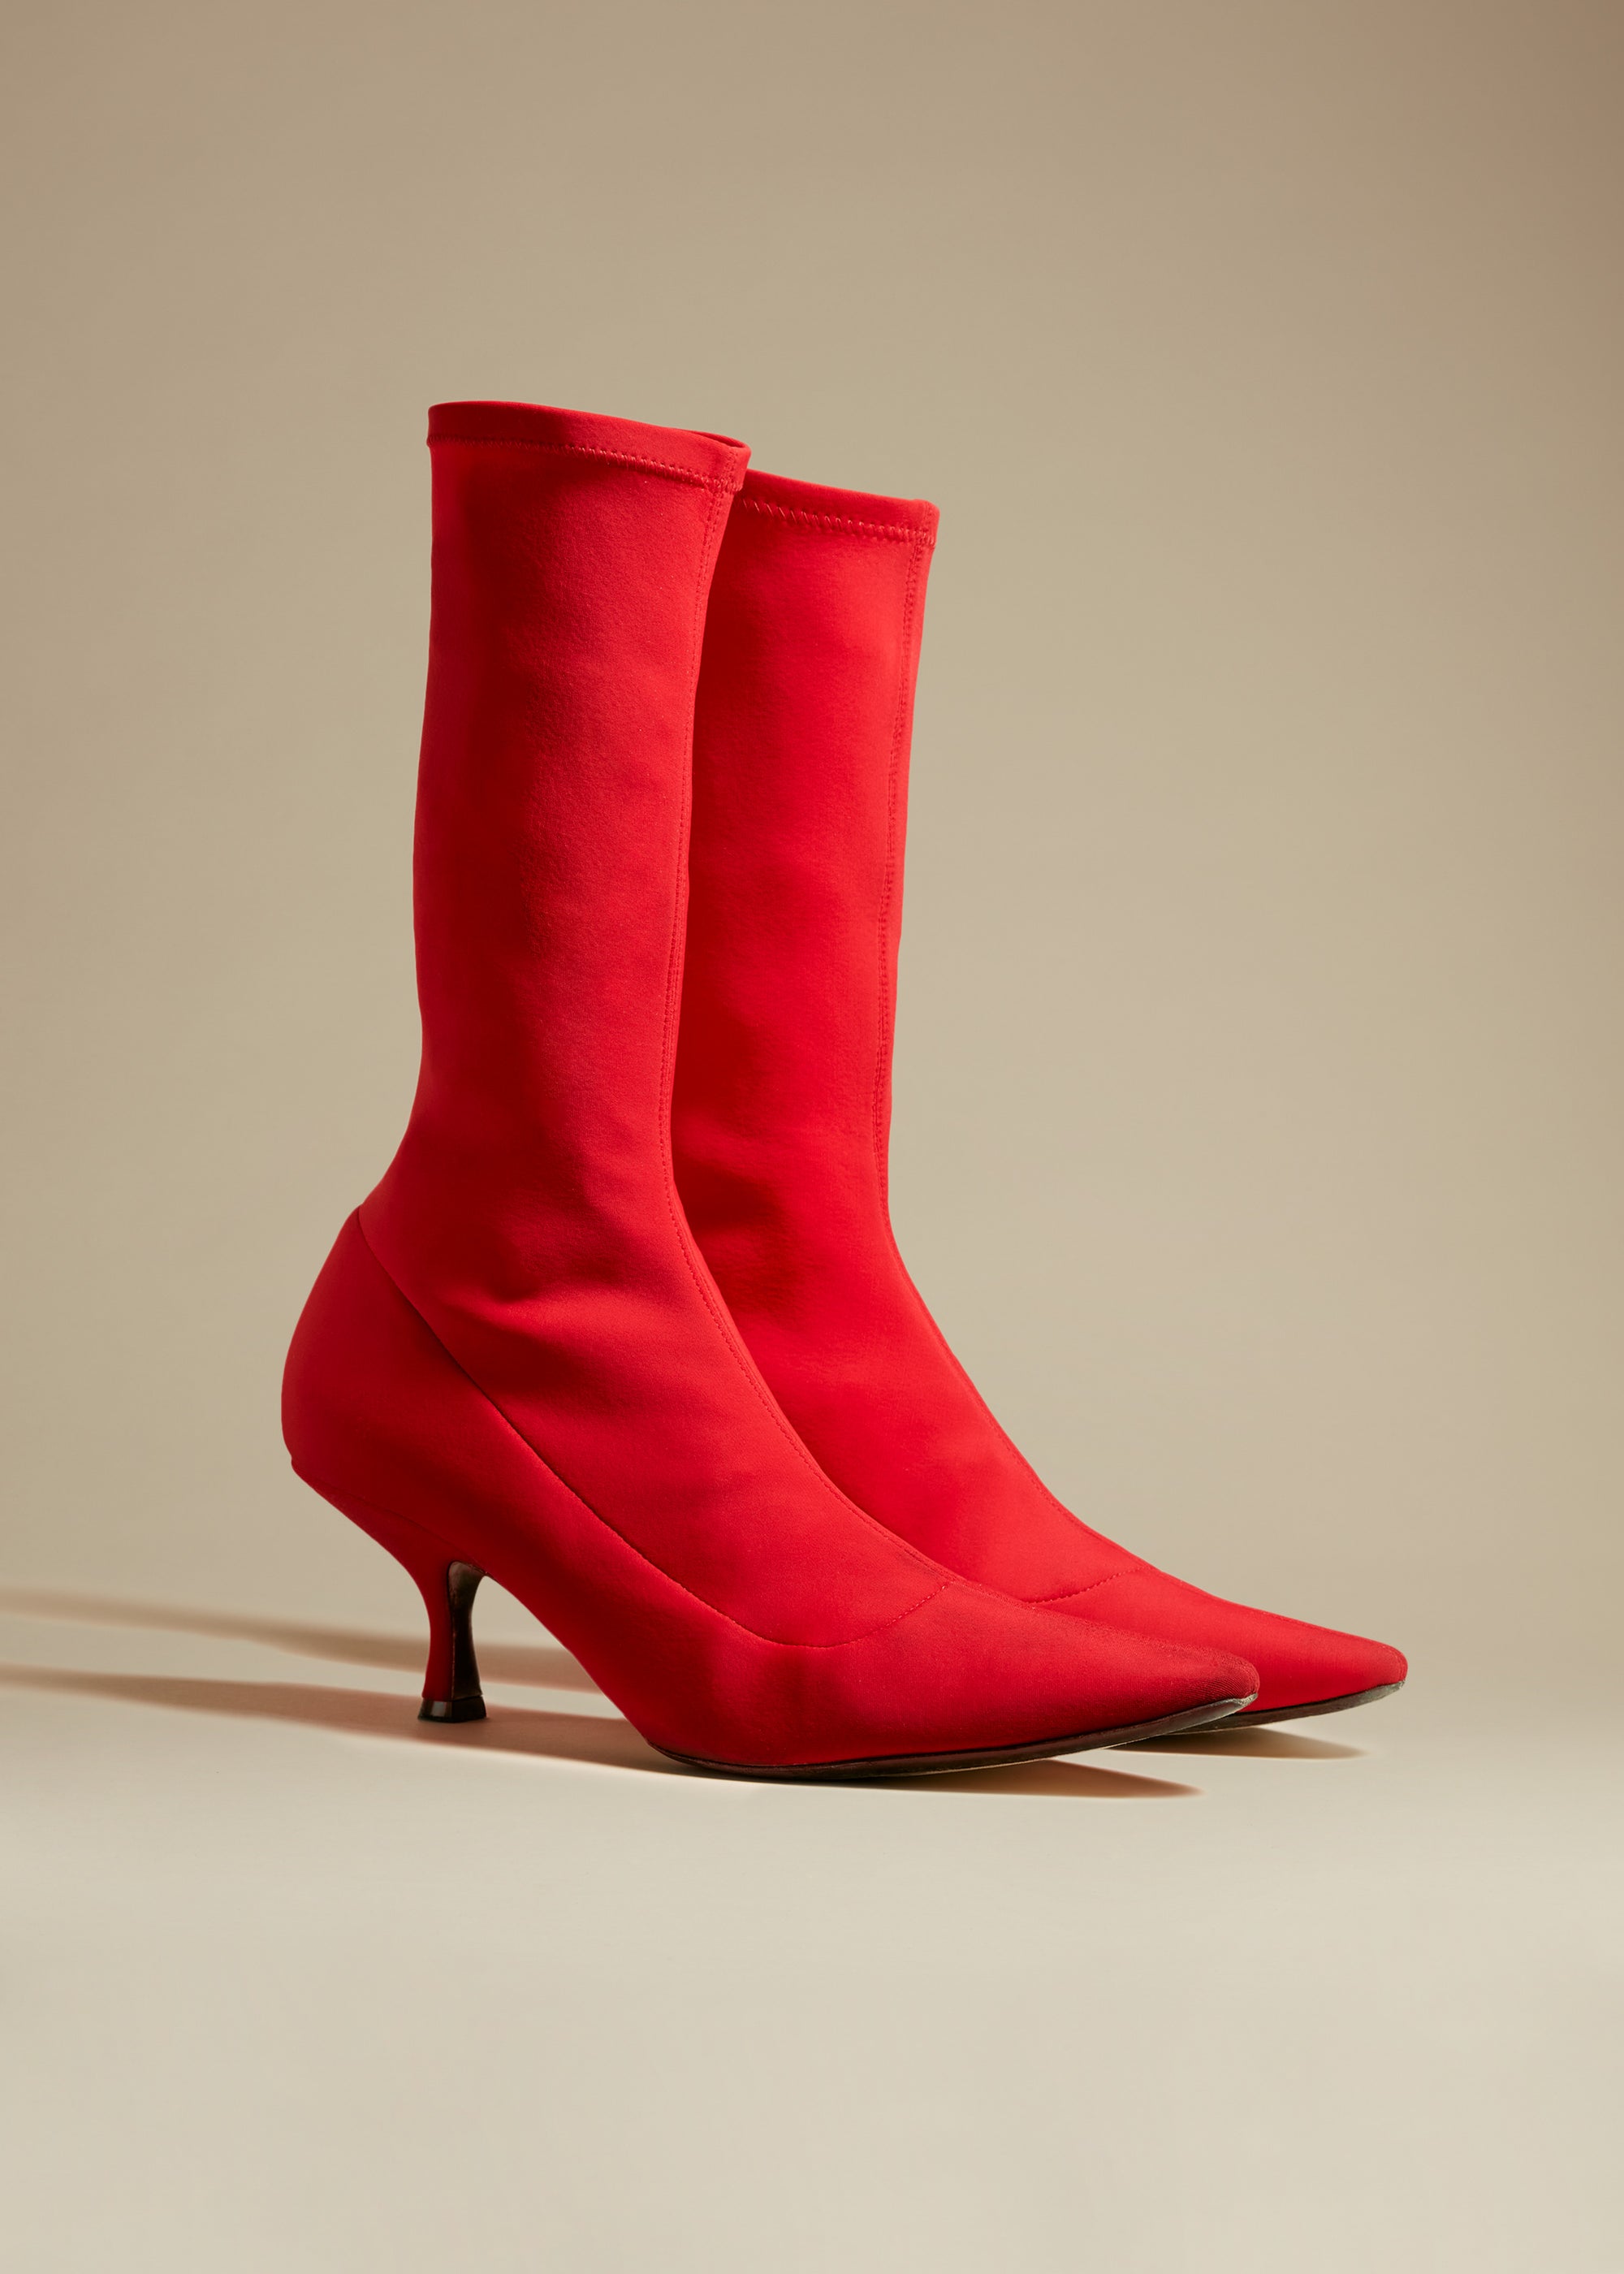 Taylor boot - Red